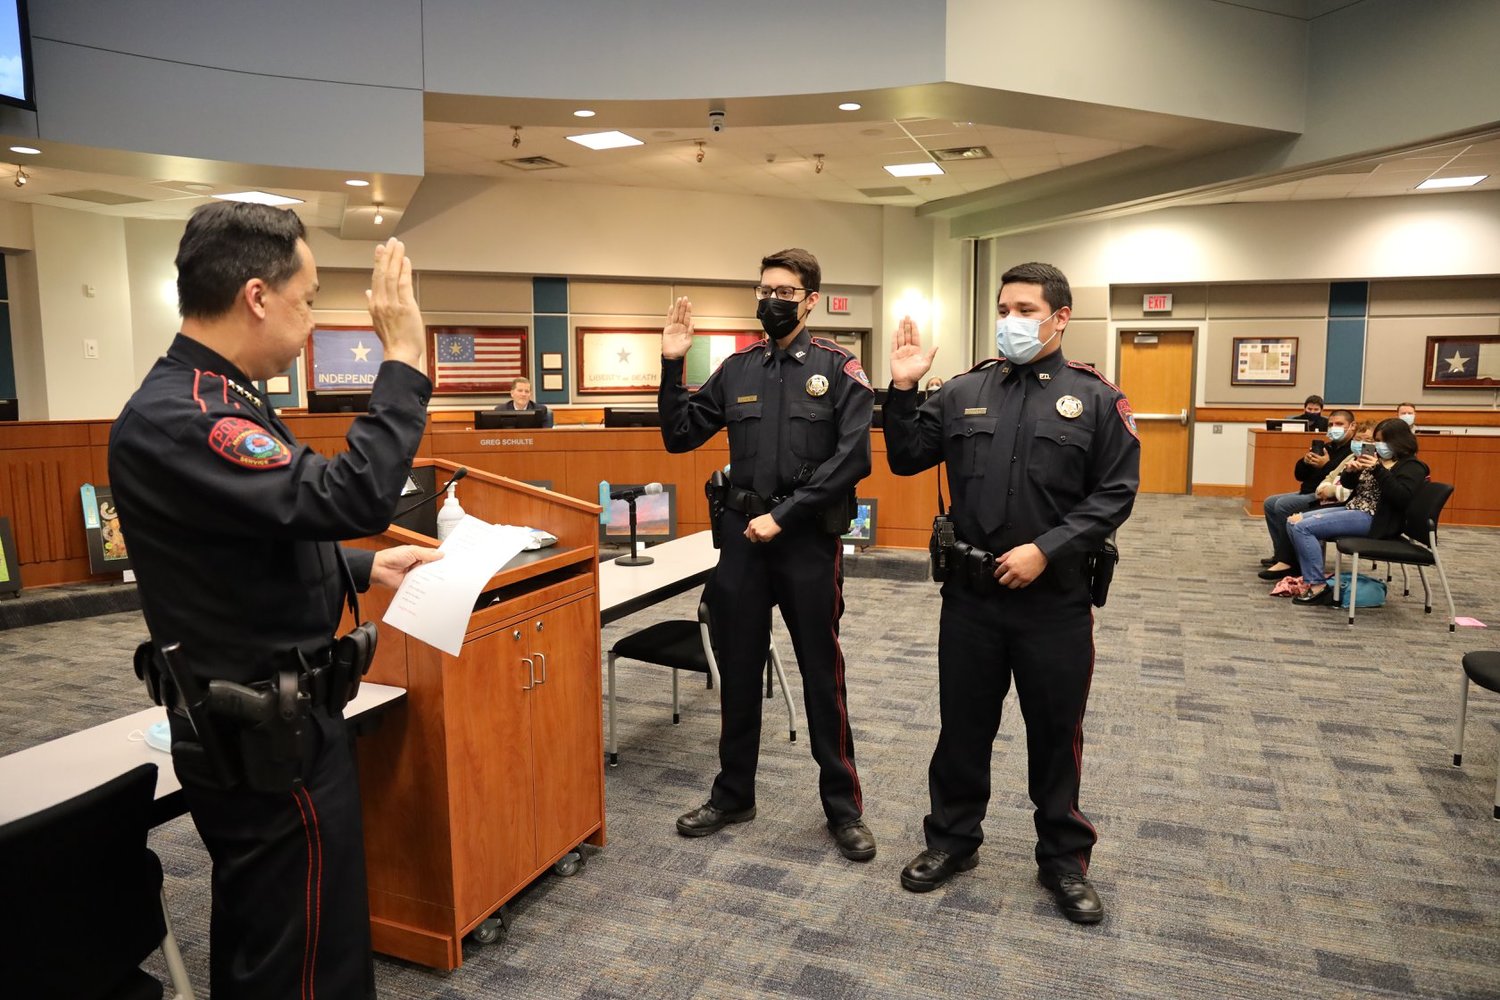 Katy ISD Police Department Officers Timothy Loya (center) and Jose Perez (right) are sworn in by KISD Police Chief Henry Gaw at the district’s Feb. 22 trustee meeting.